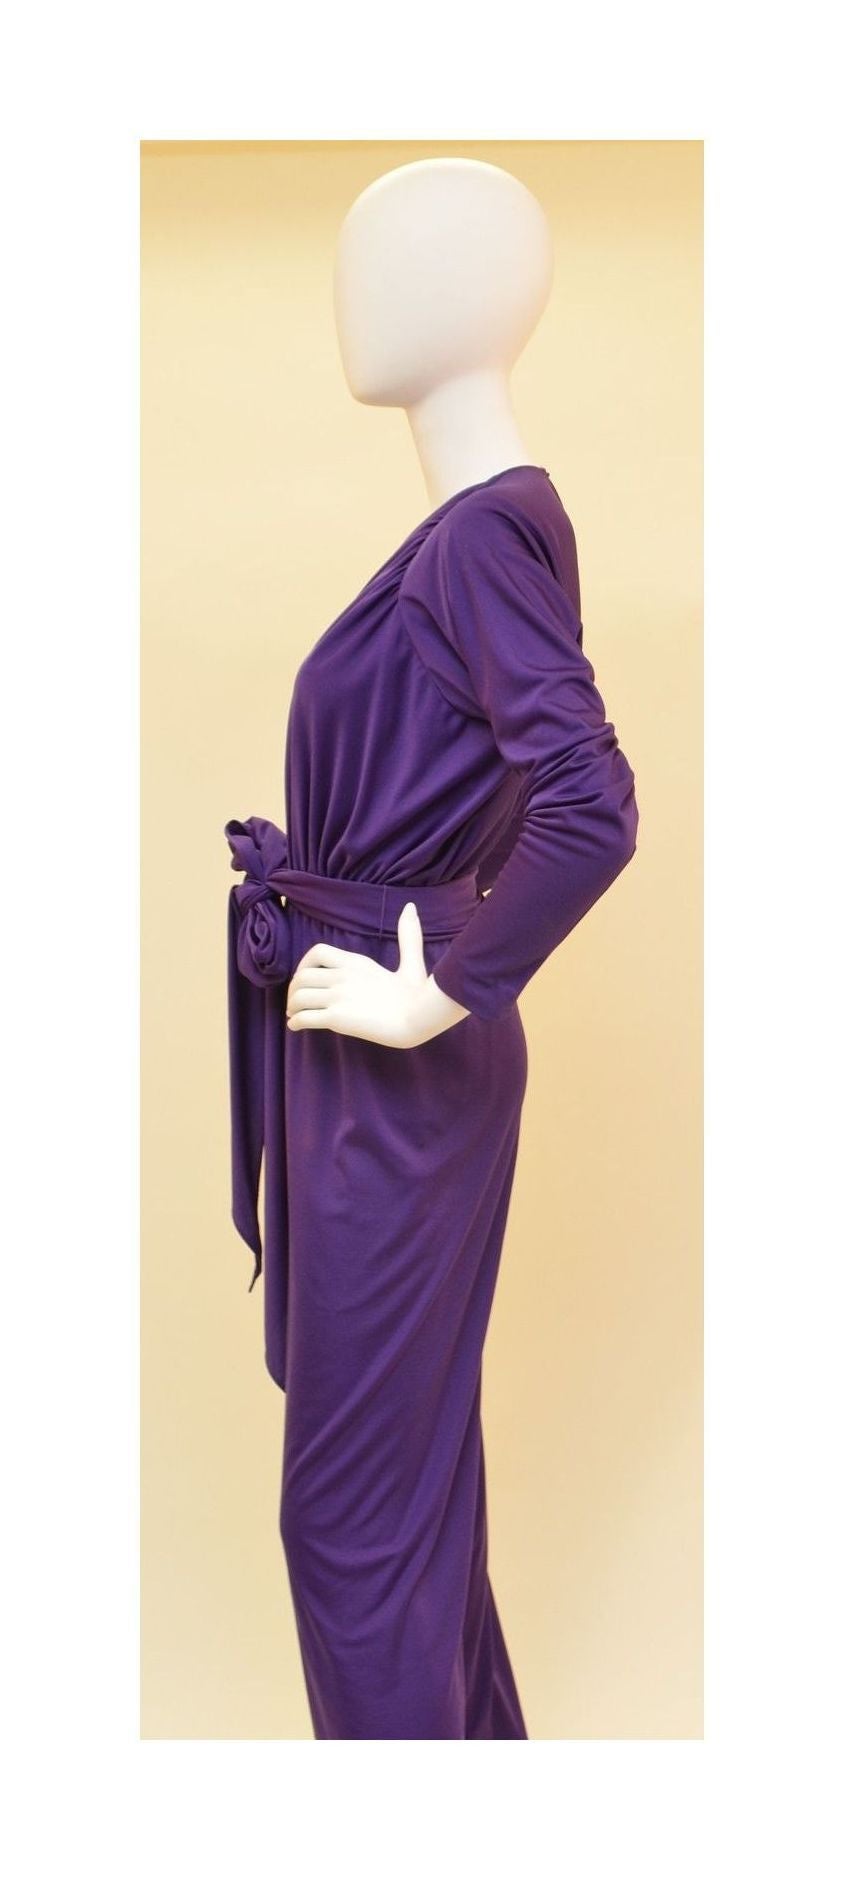 Vintage Halston jumpsuit is a petite size, has a waist tie closure, V-neckline with pin-tucking at the shoulder area. Fabric has stretch along the elasticized waist band.

Measurements:
Bust - 38''
Waist - 24'' to 32''
Hips - 34''
Length -